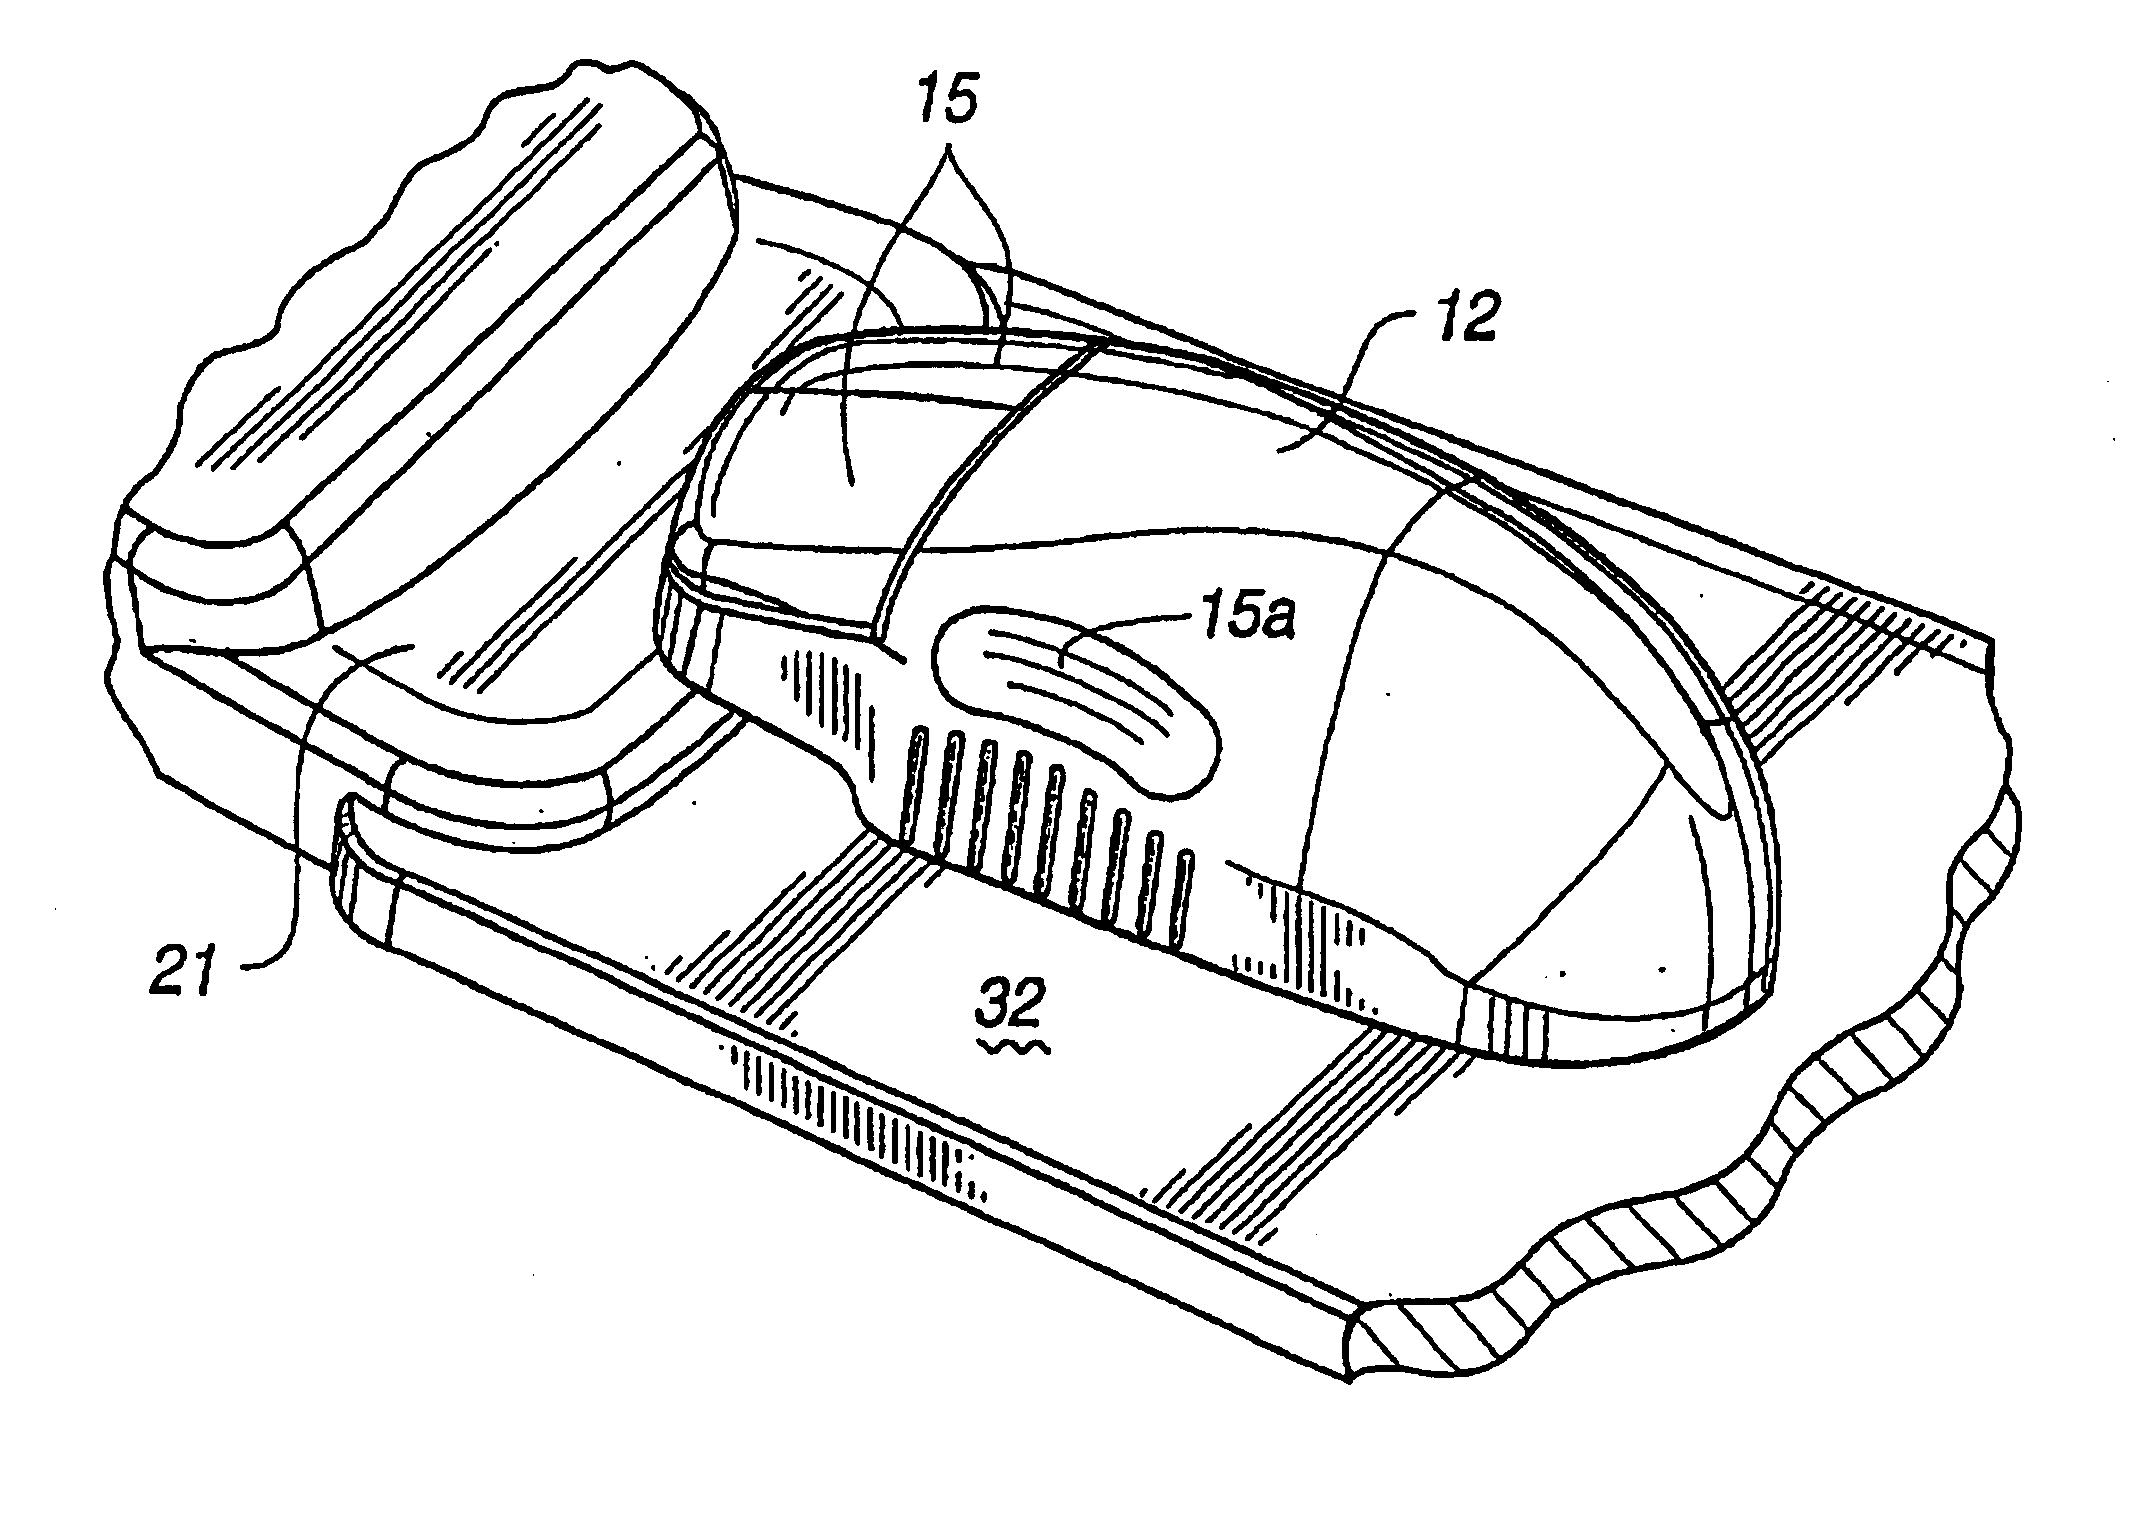 Force feedback interface device with force functionality button